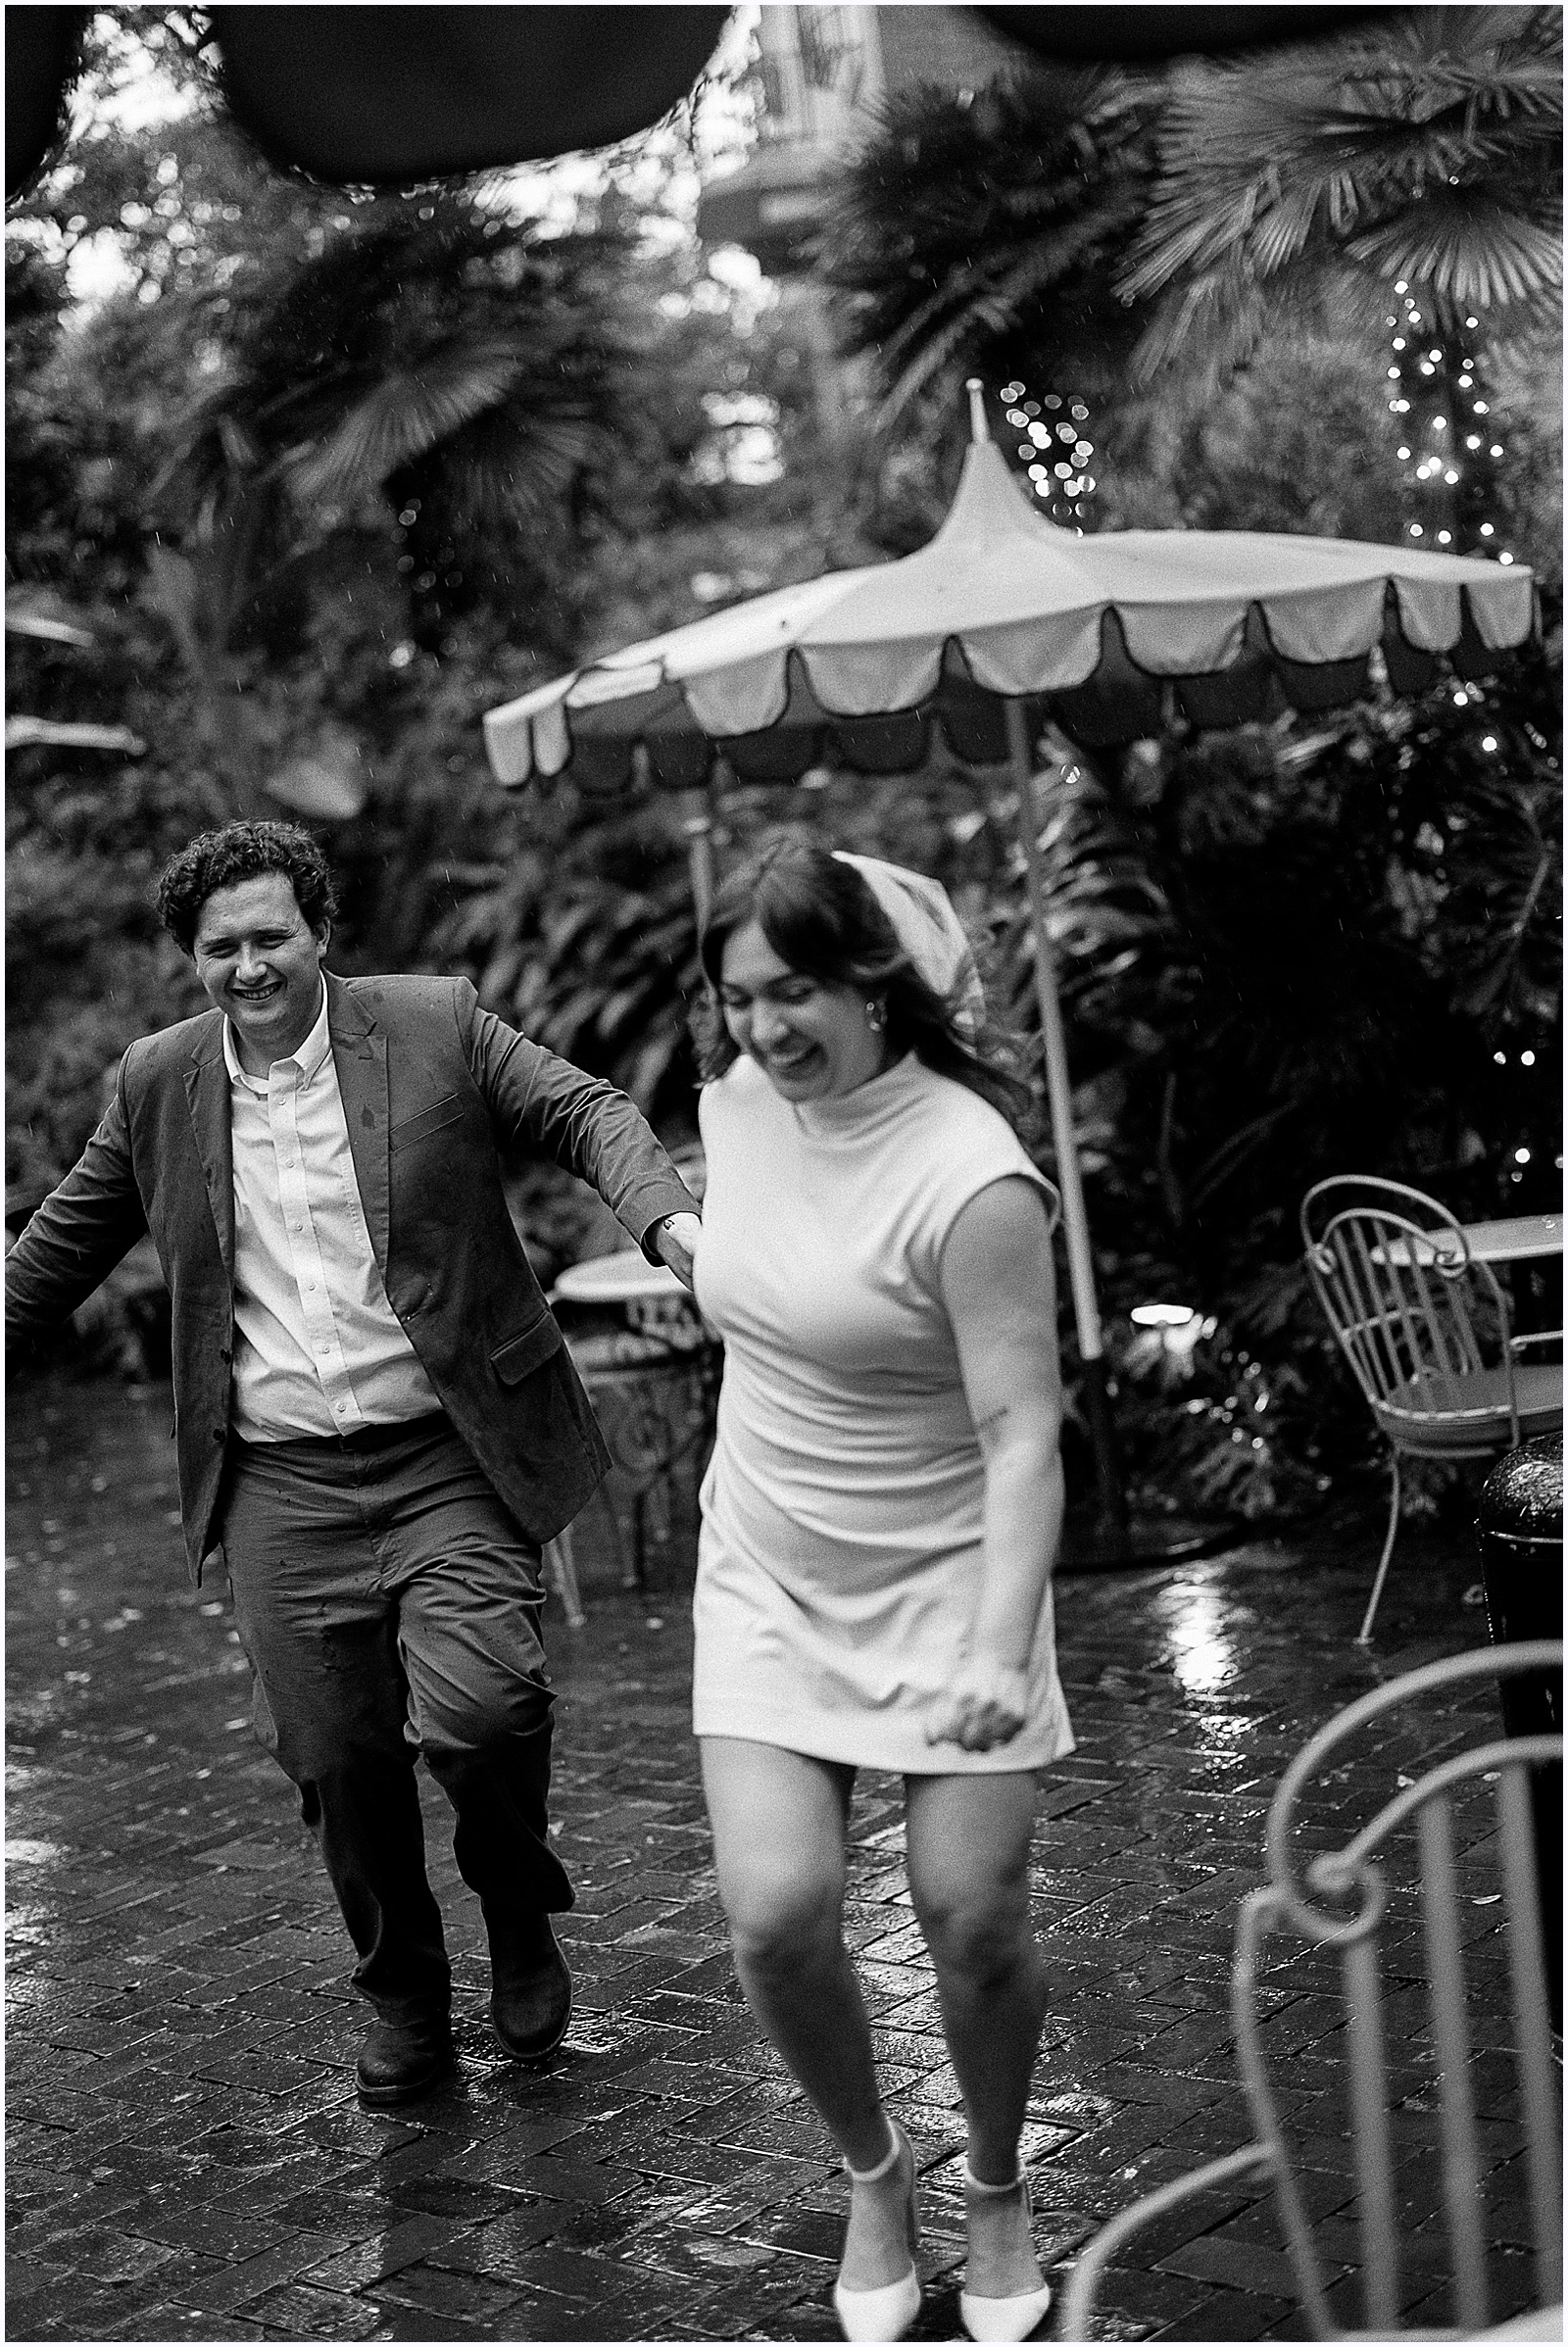 A man and woman run through the rain on the patio of the Columns Hotel in New Orleans